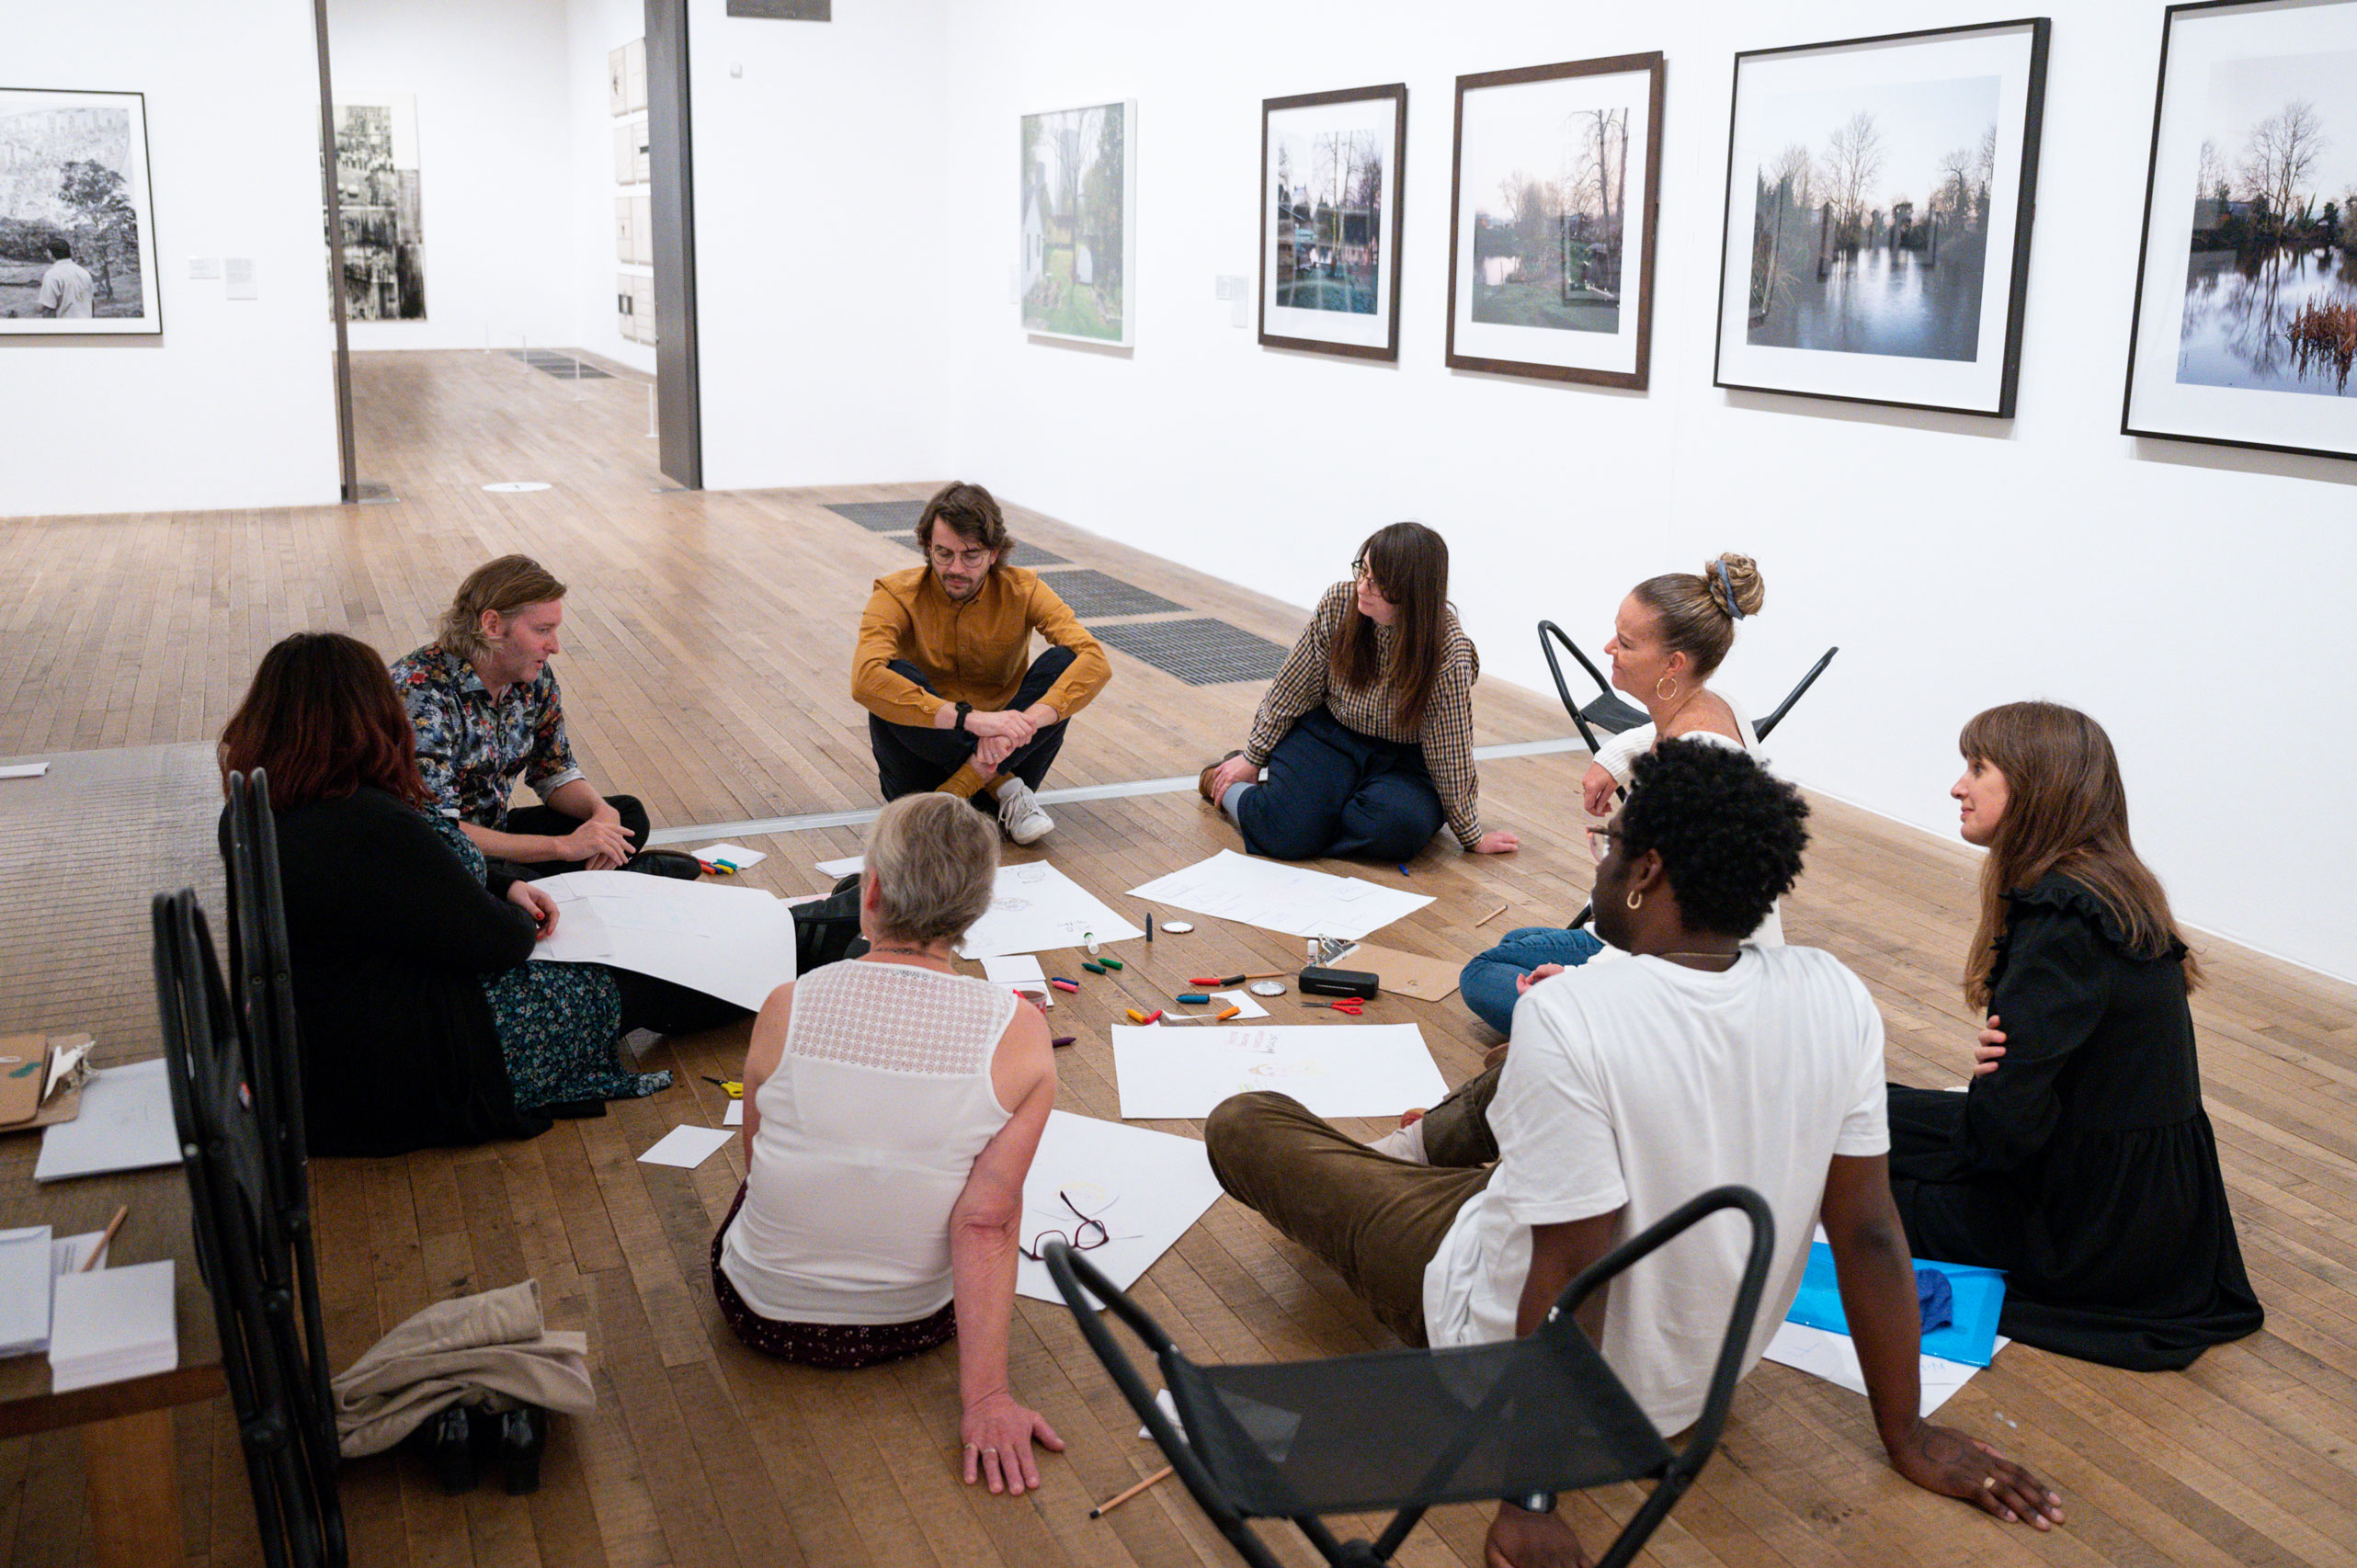 A group of people sitting on the floor of an art gallery surrounded with paper and pencils